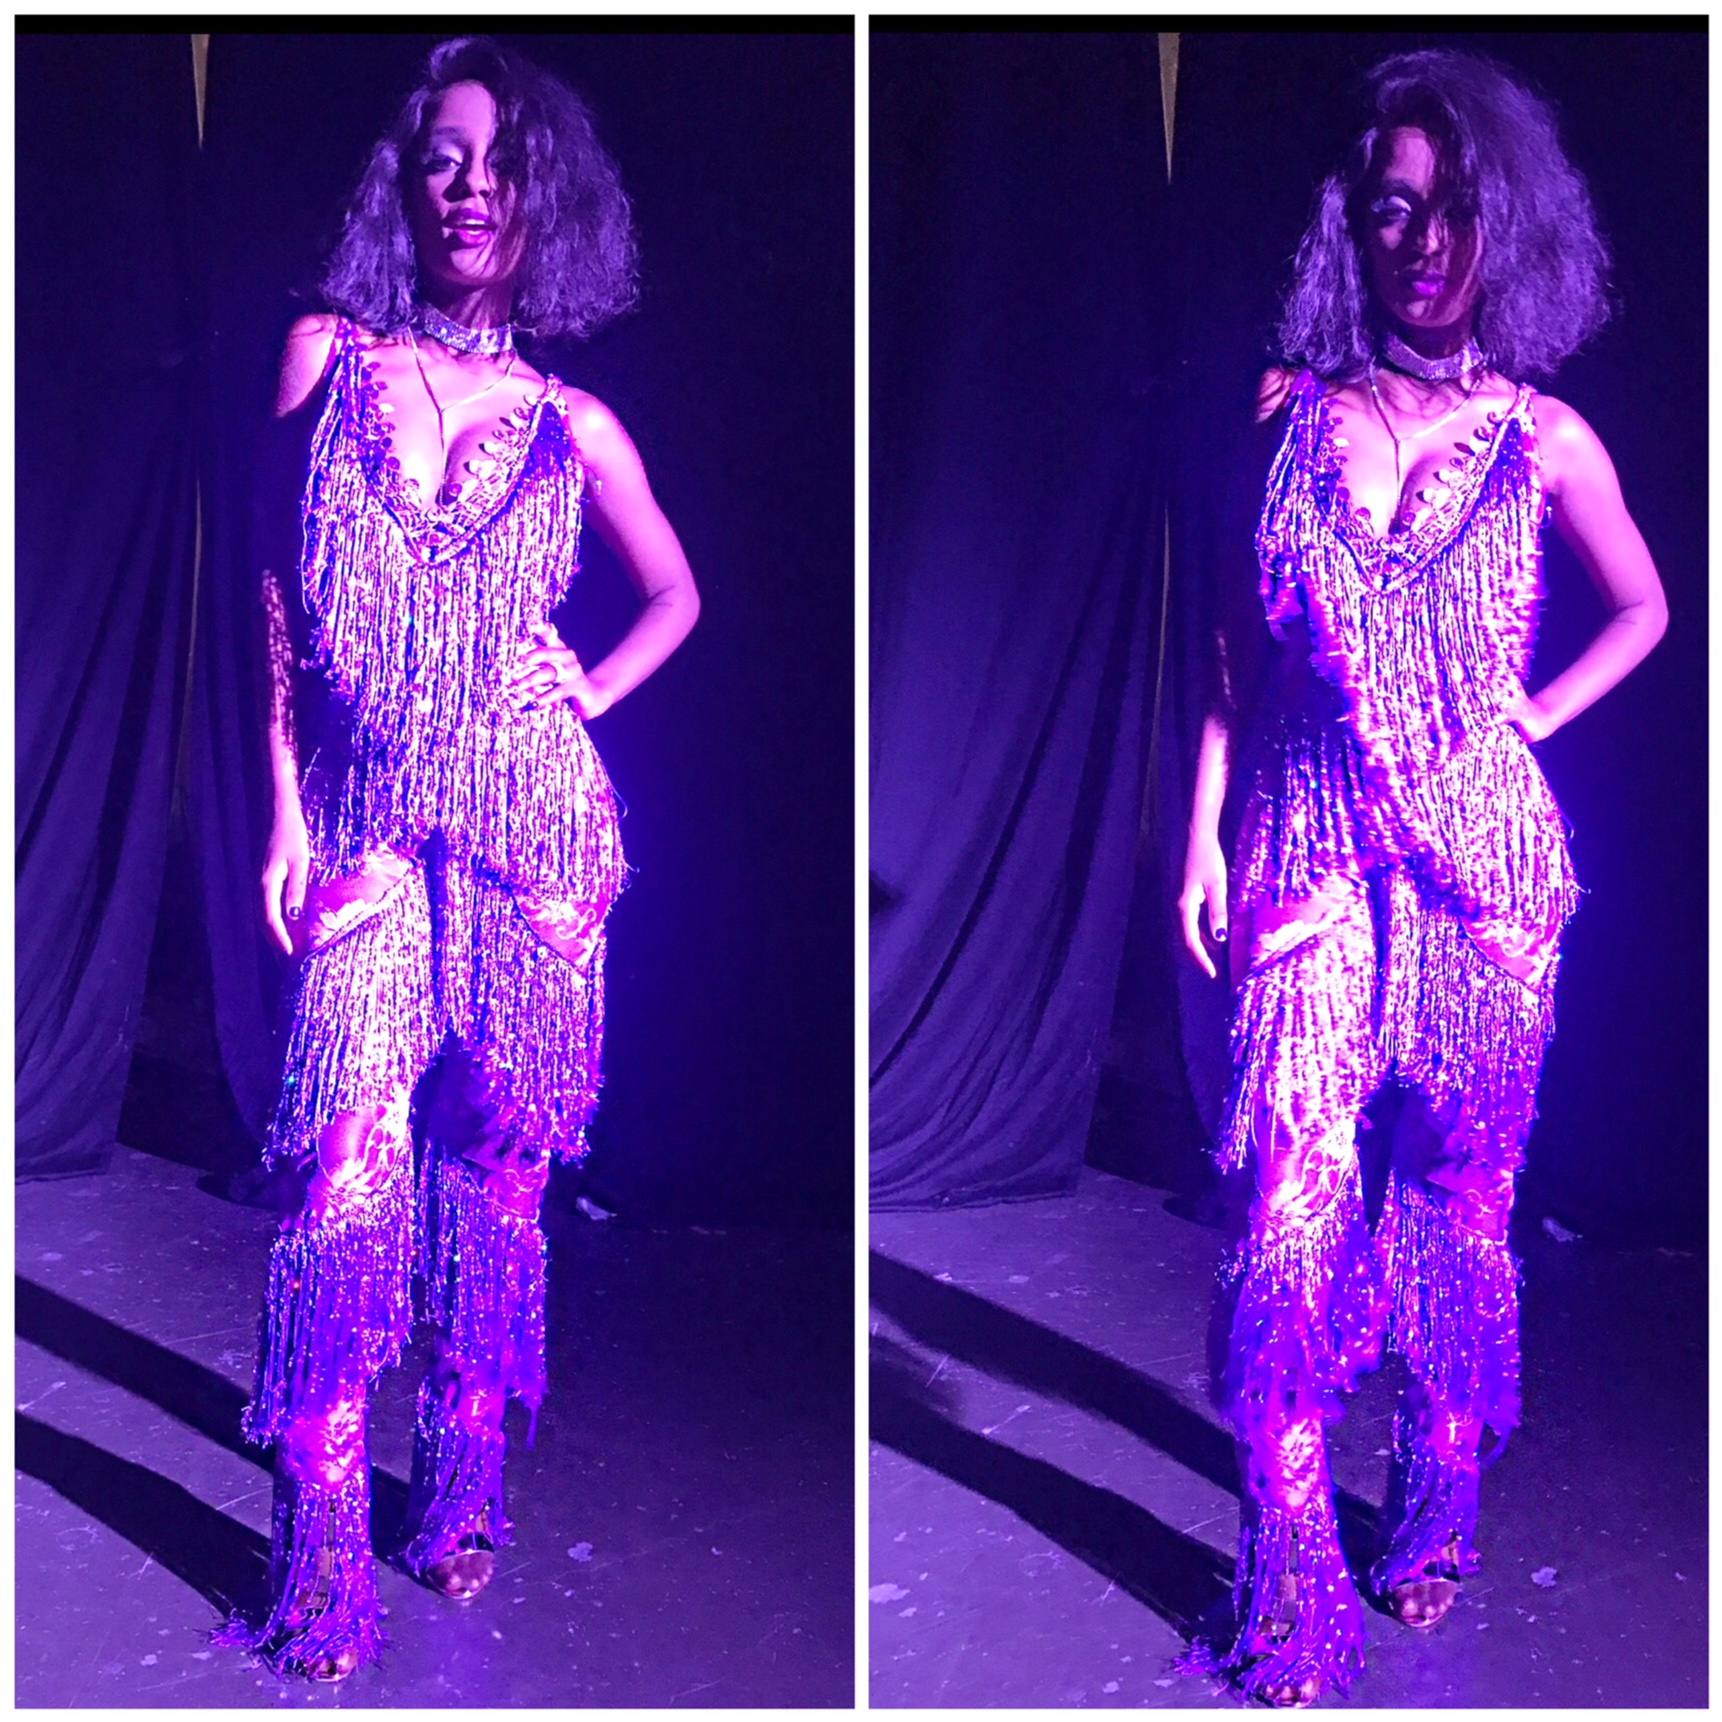 Check out Tiwa Savage , Emma Nyra, Vanessa Mdee styled by Swanky Jerry for one Africa music fest Dubai (Photos)